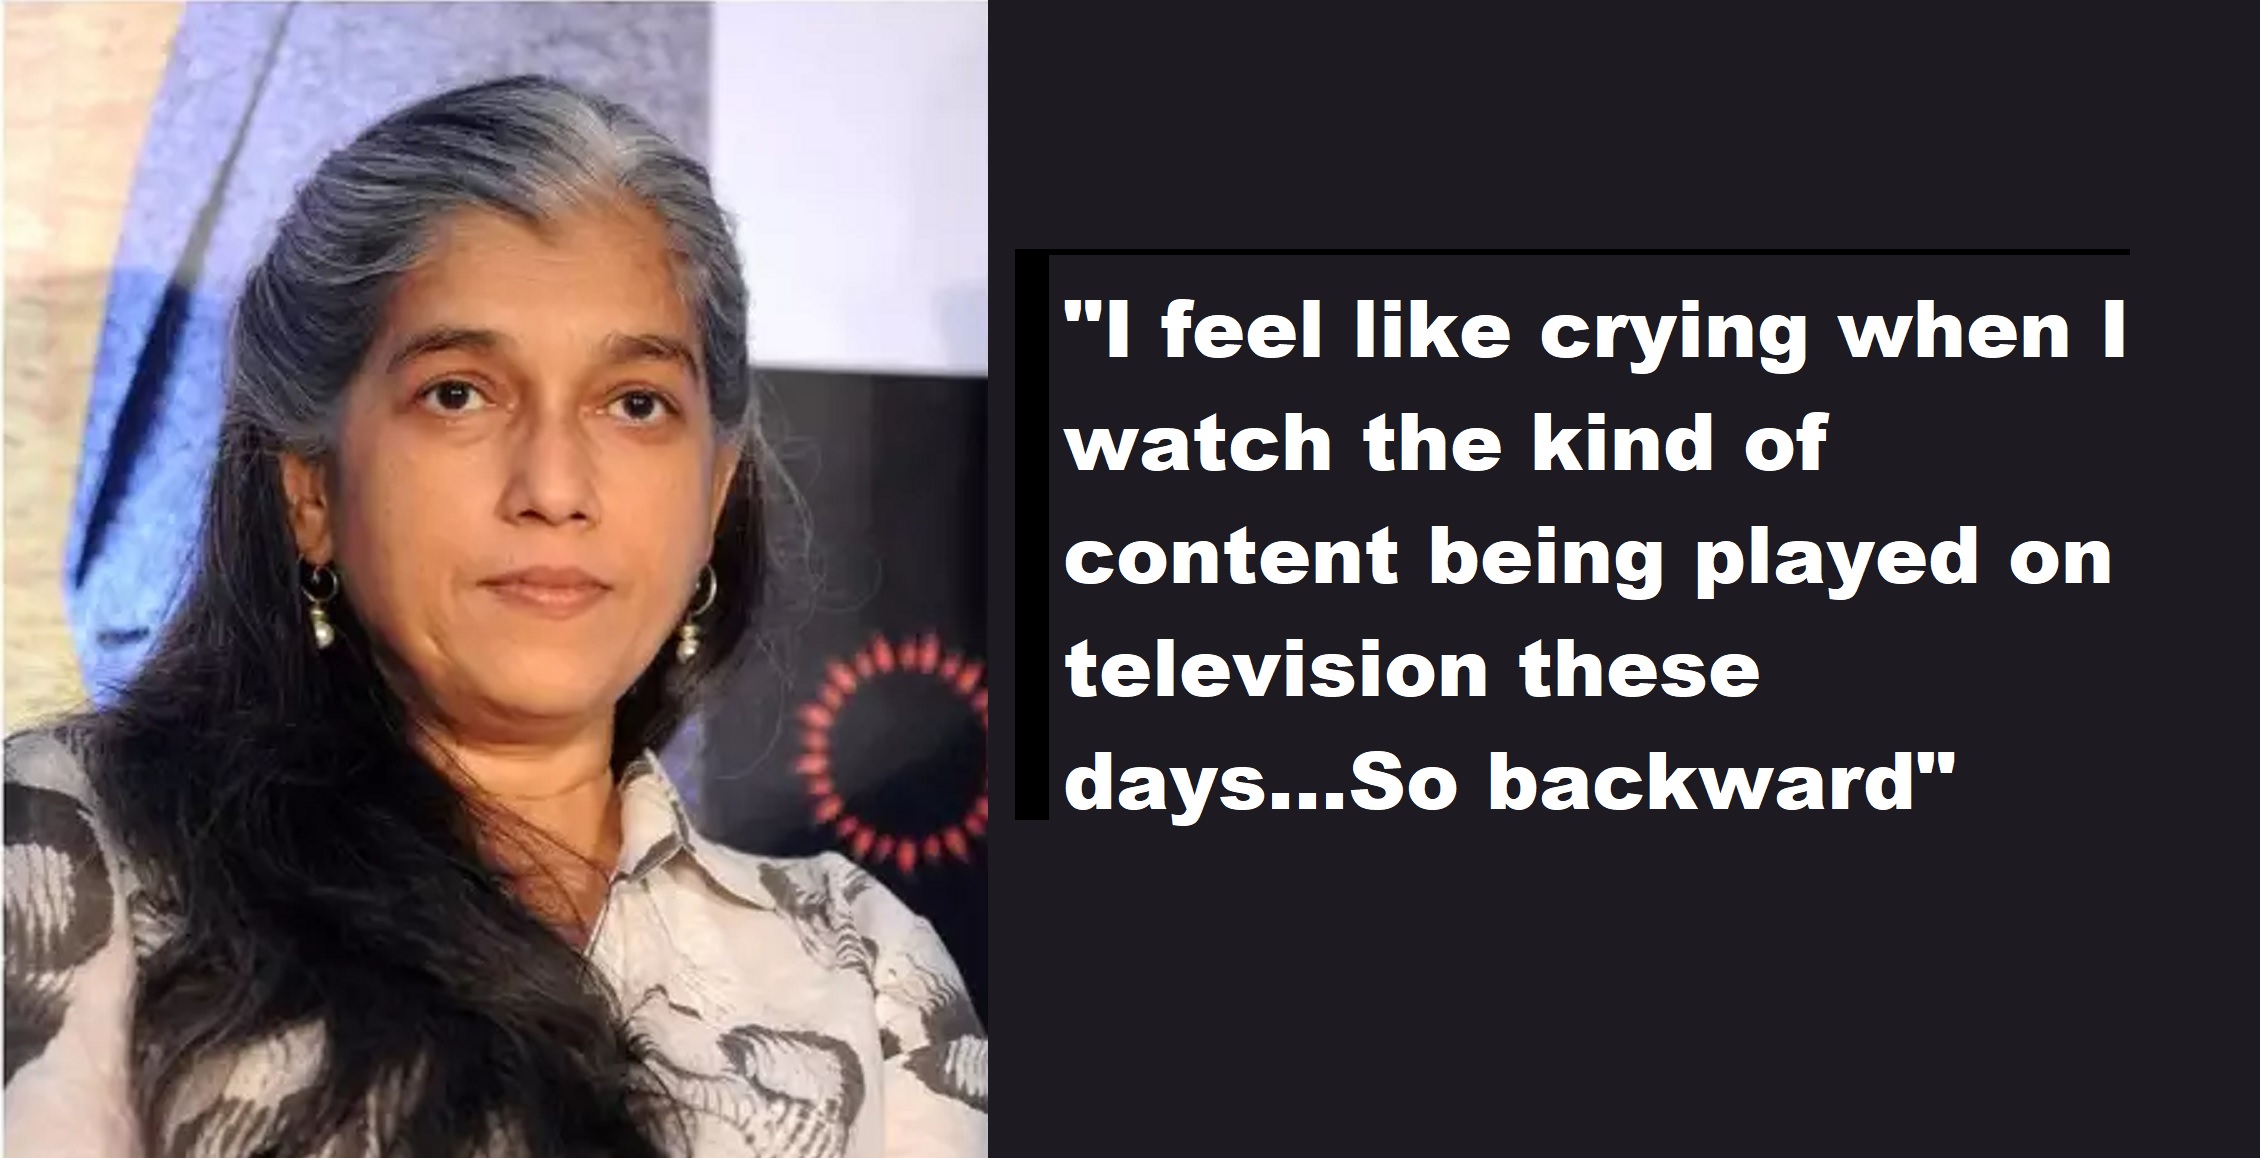 Ratna Pathak Shah On Today’s TV Shows: ‘We are back to saas-bahu dramas. It is so crude and regressive.’